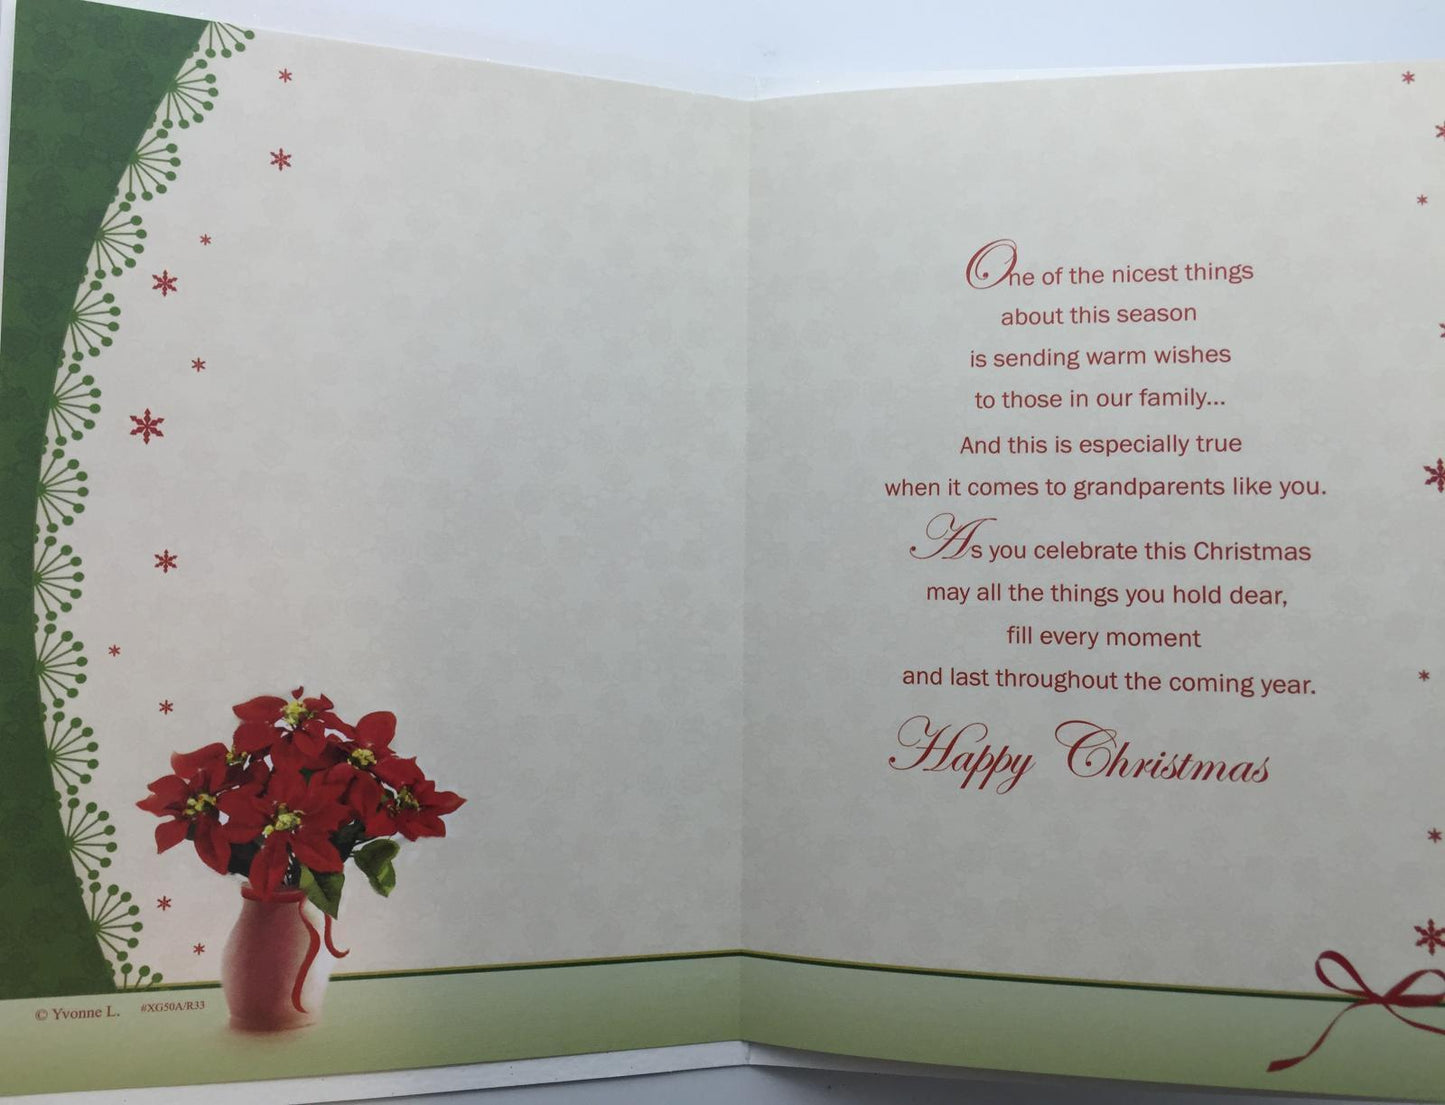 Grandparents Christmas Greeting Card With Sentimental Verse